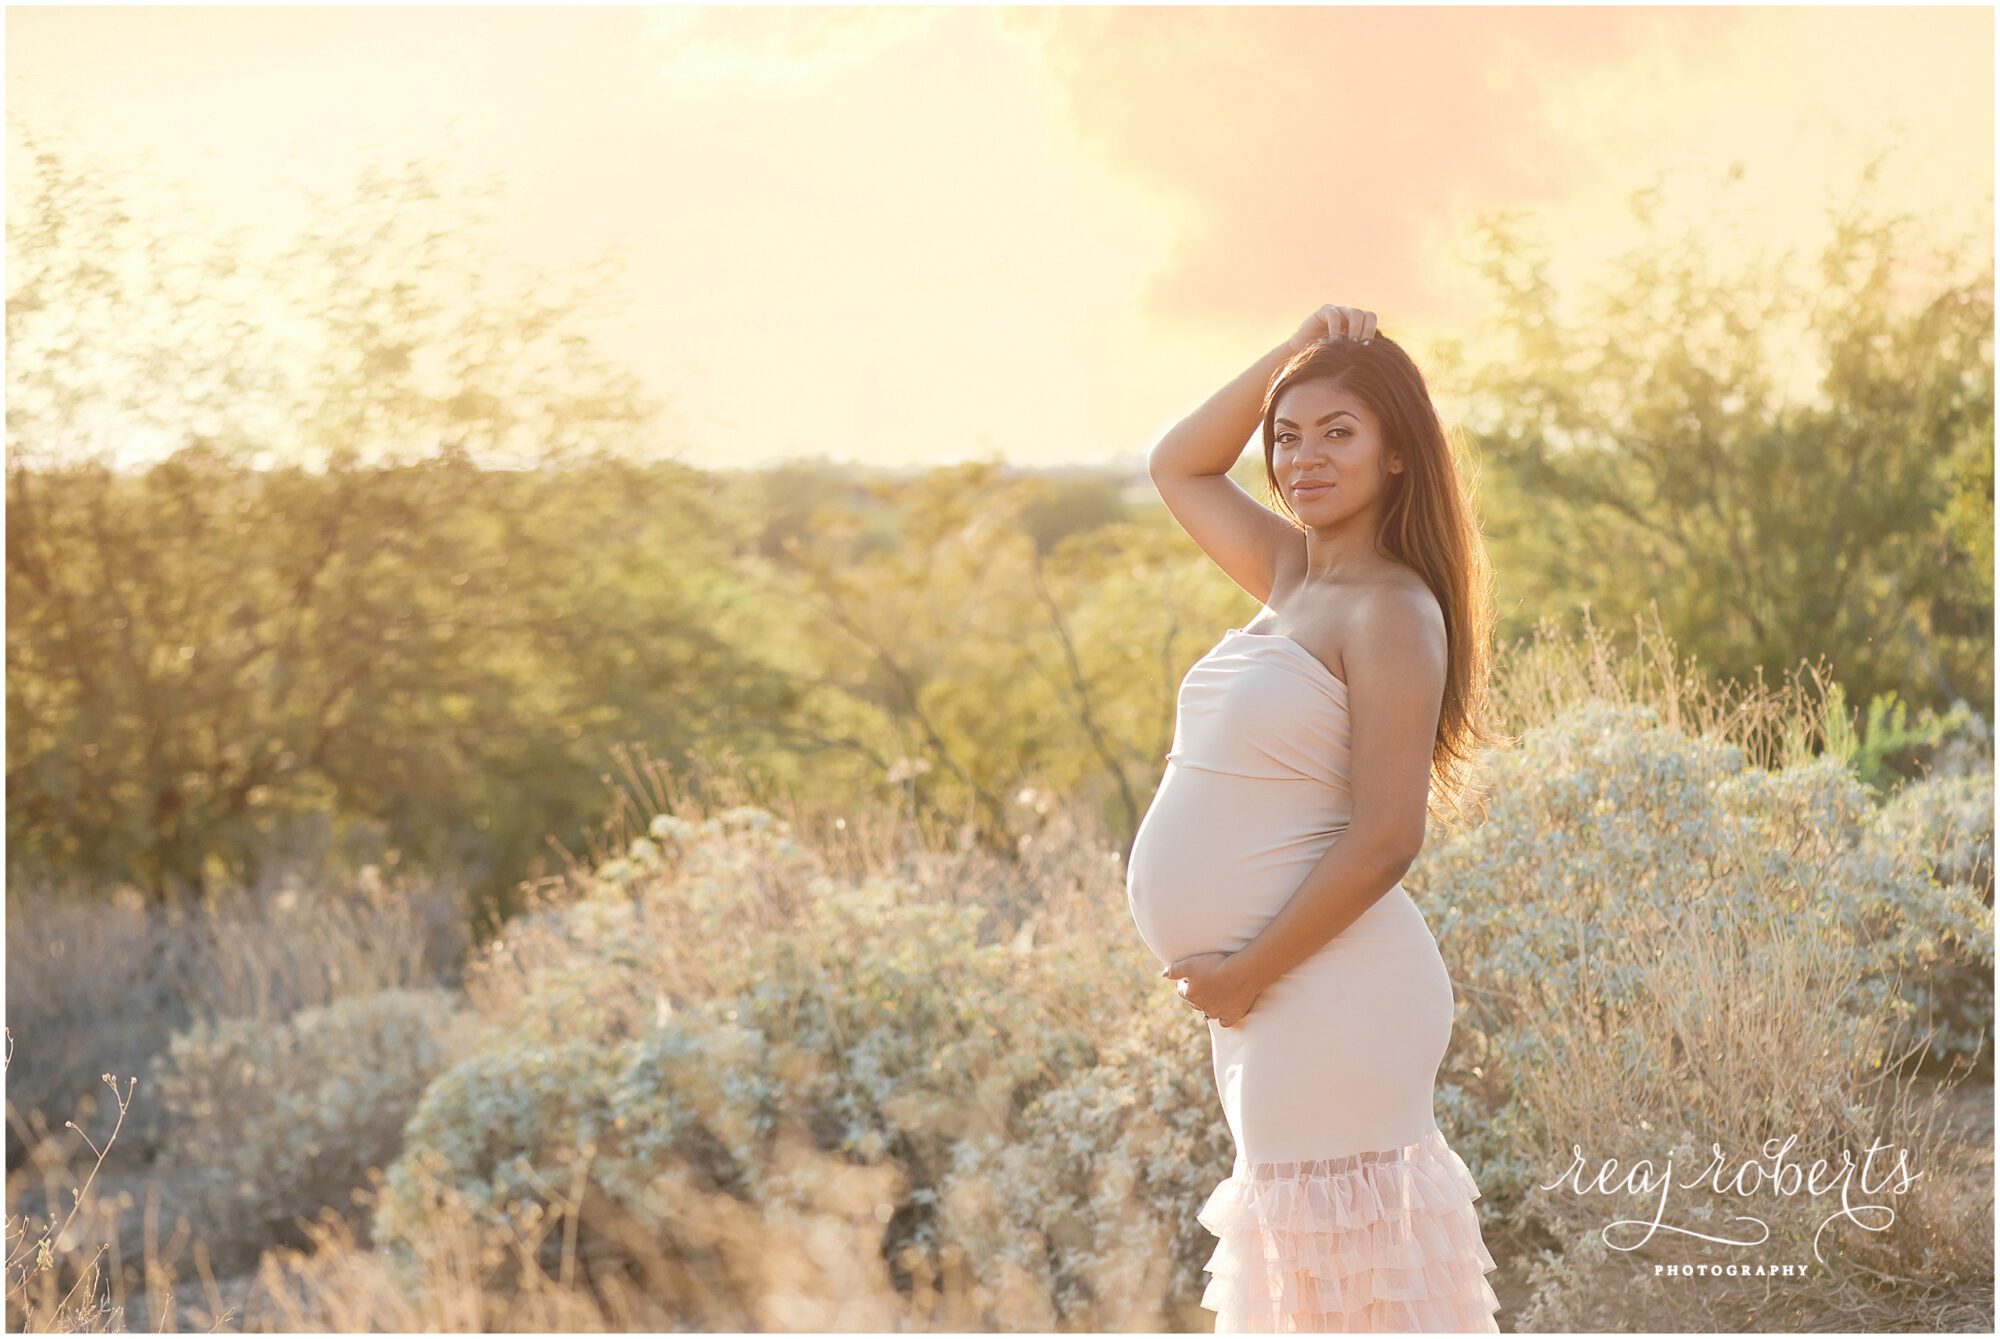 TAOPAN maternity gown, sunset maternity session | Reaj Roberts Photography